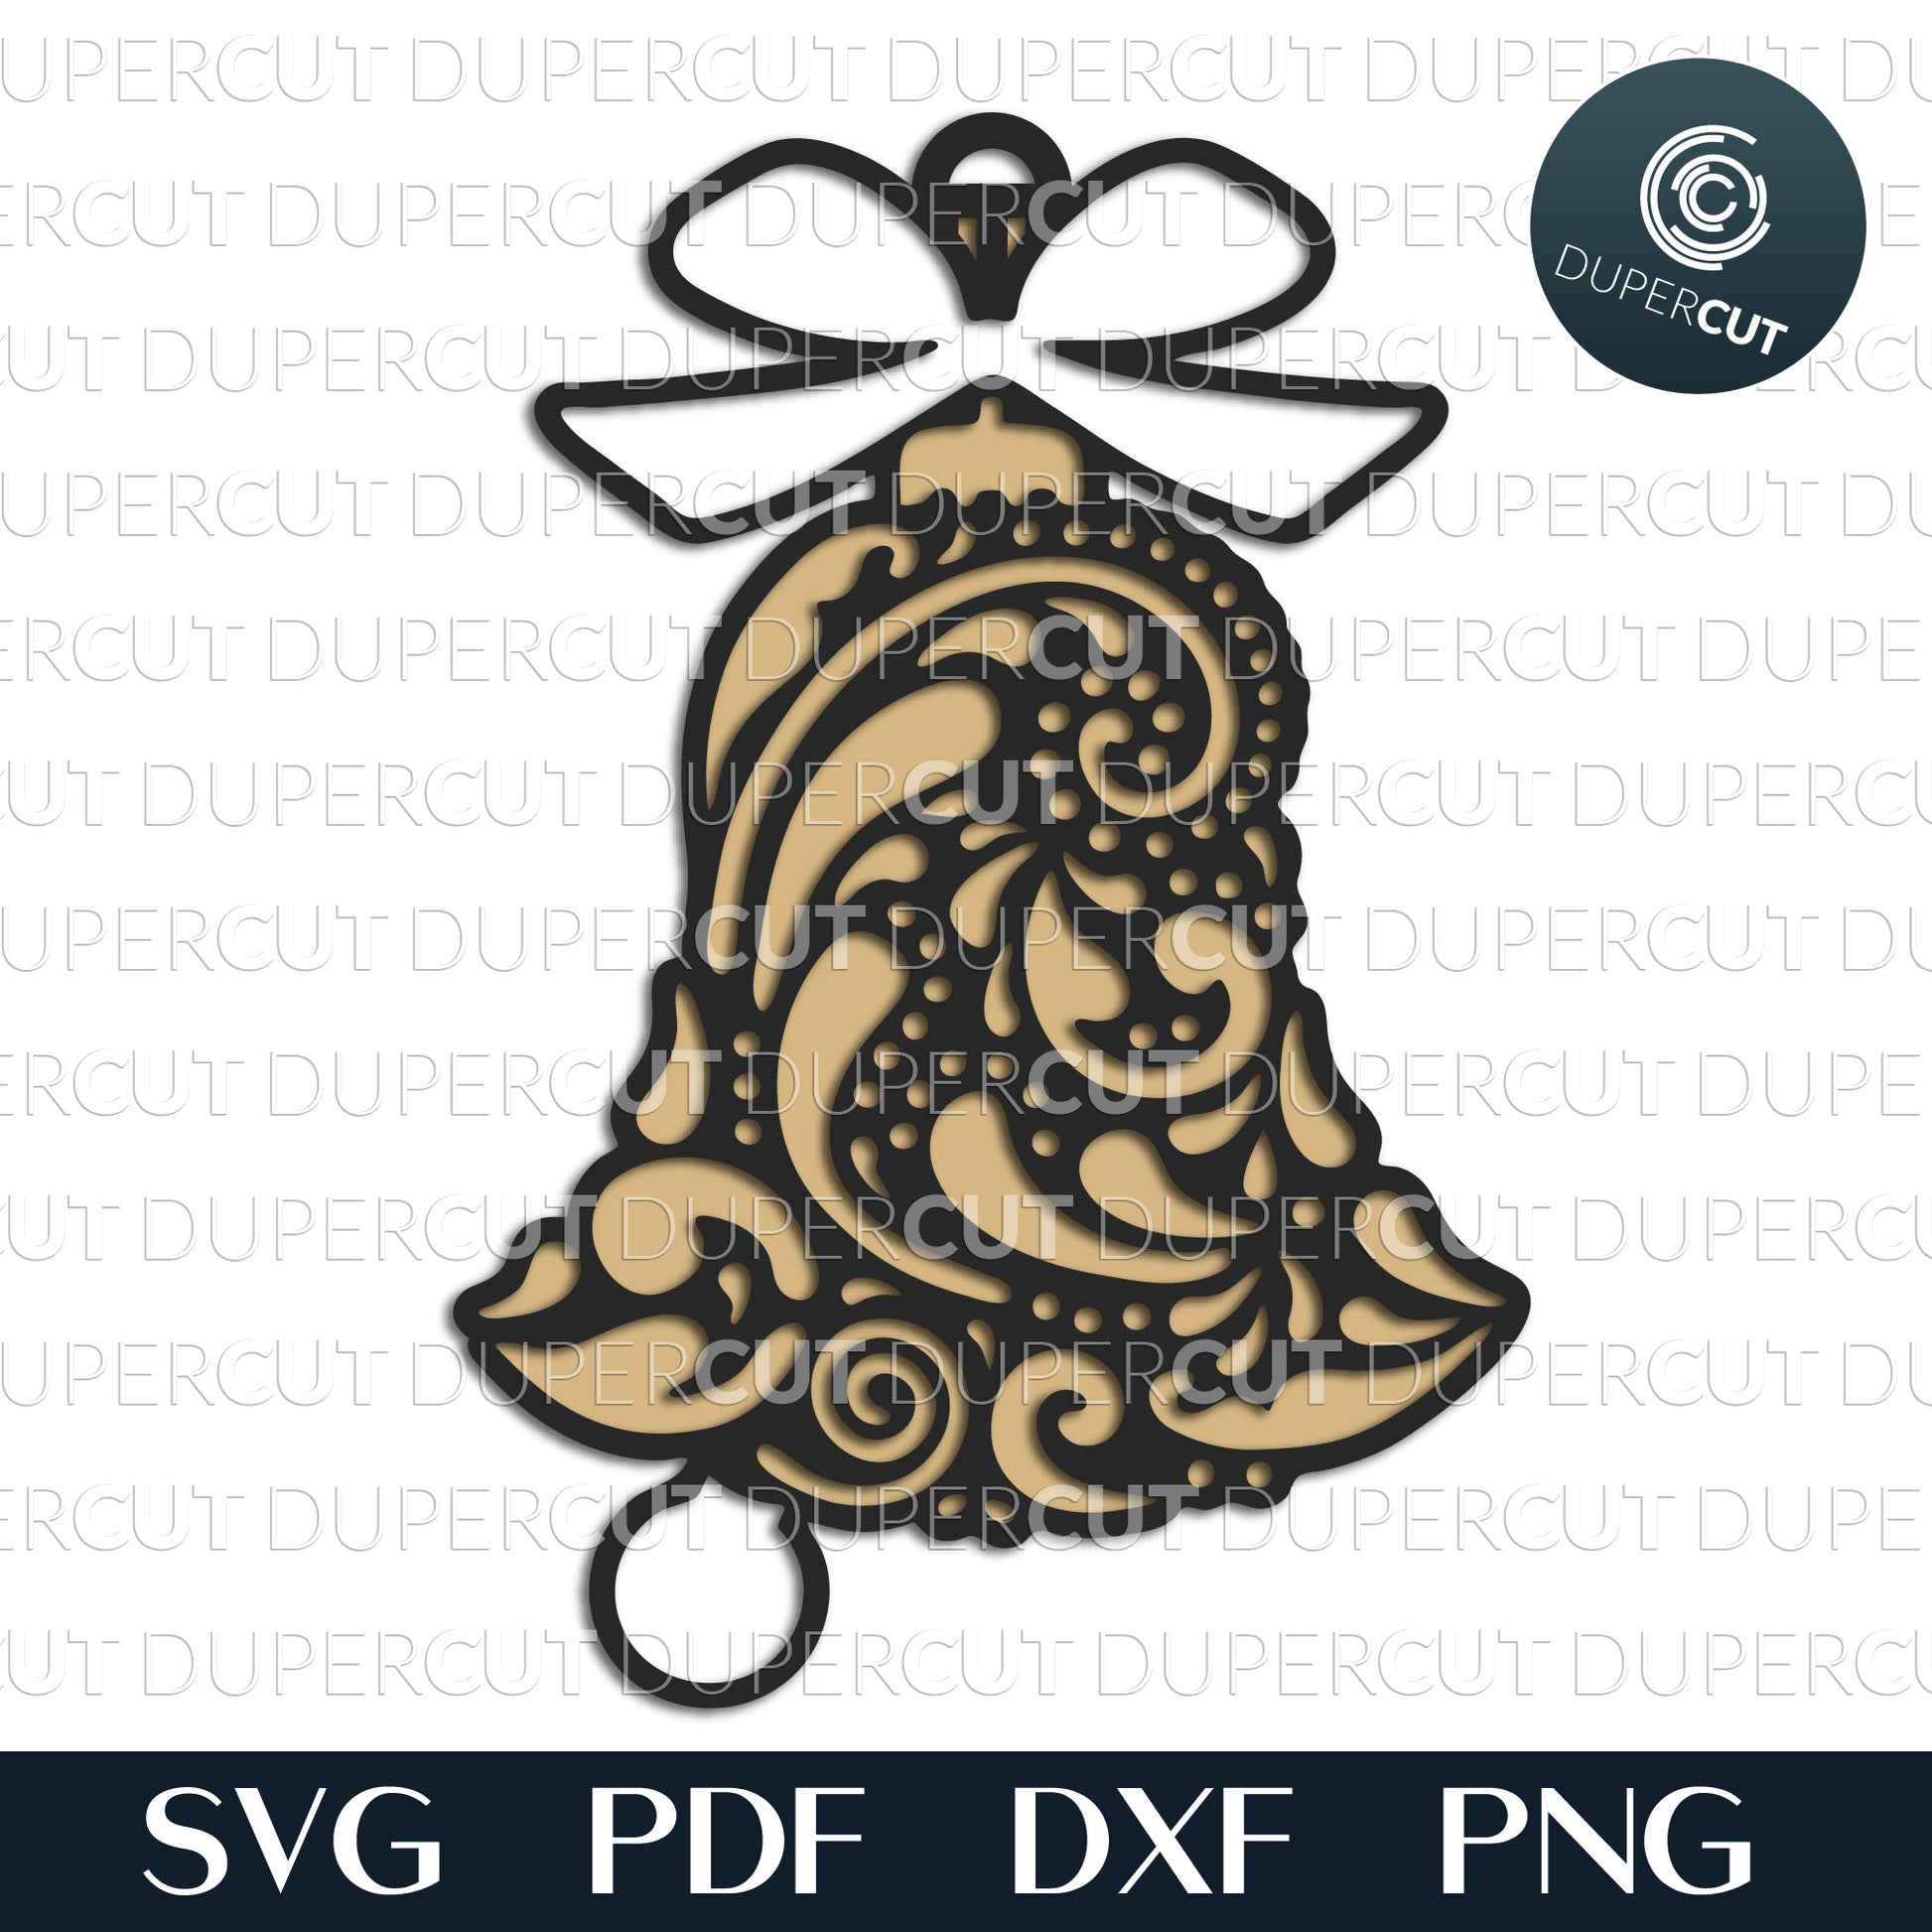 Folk art bell Christmas ornament - layered cutting template - SVG DXF PDF vector files for laser engraving and cutting, Glowforge, Cricut, Silhouette Cameo